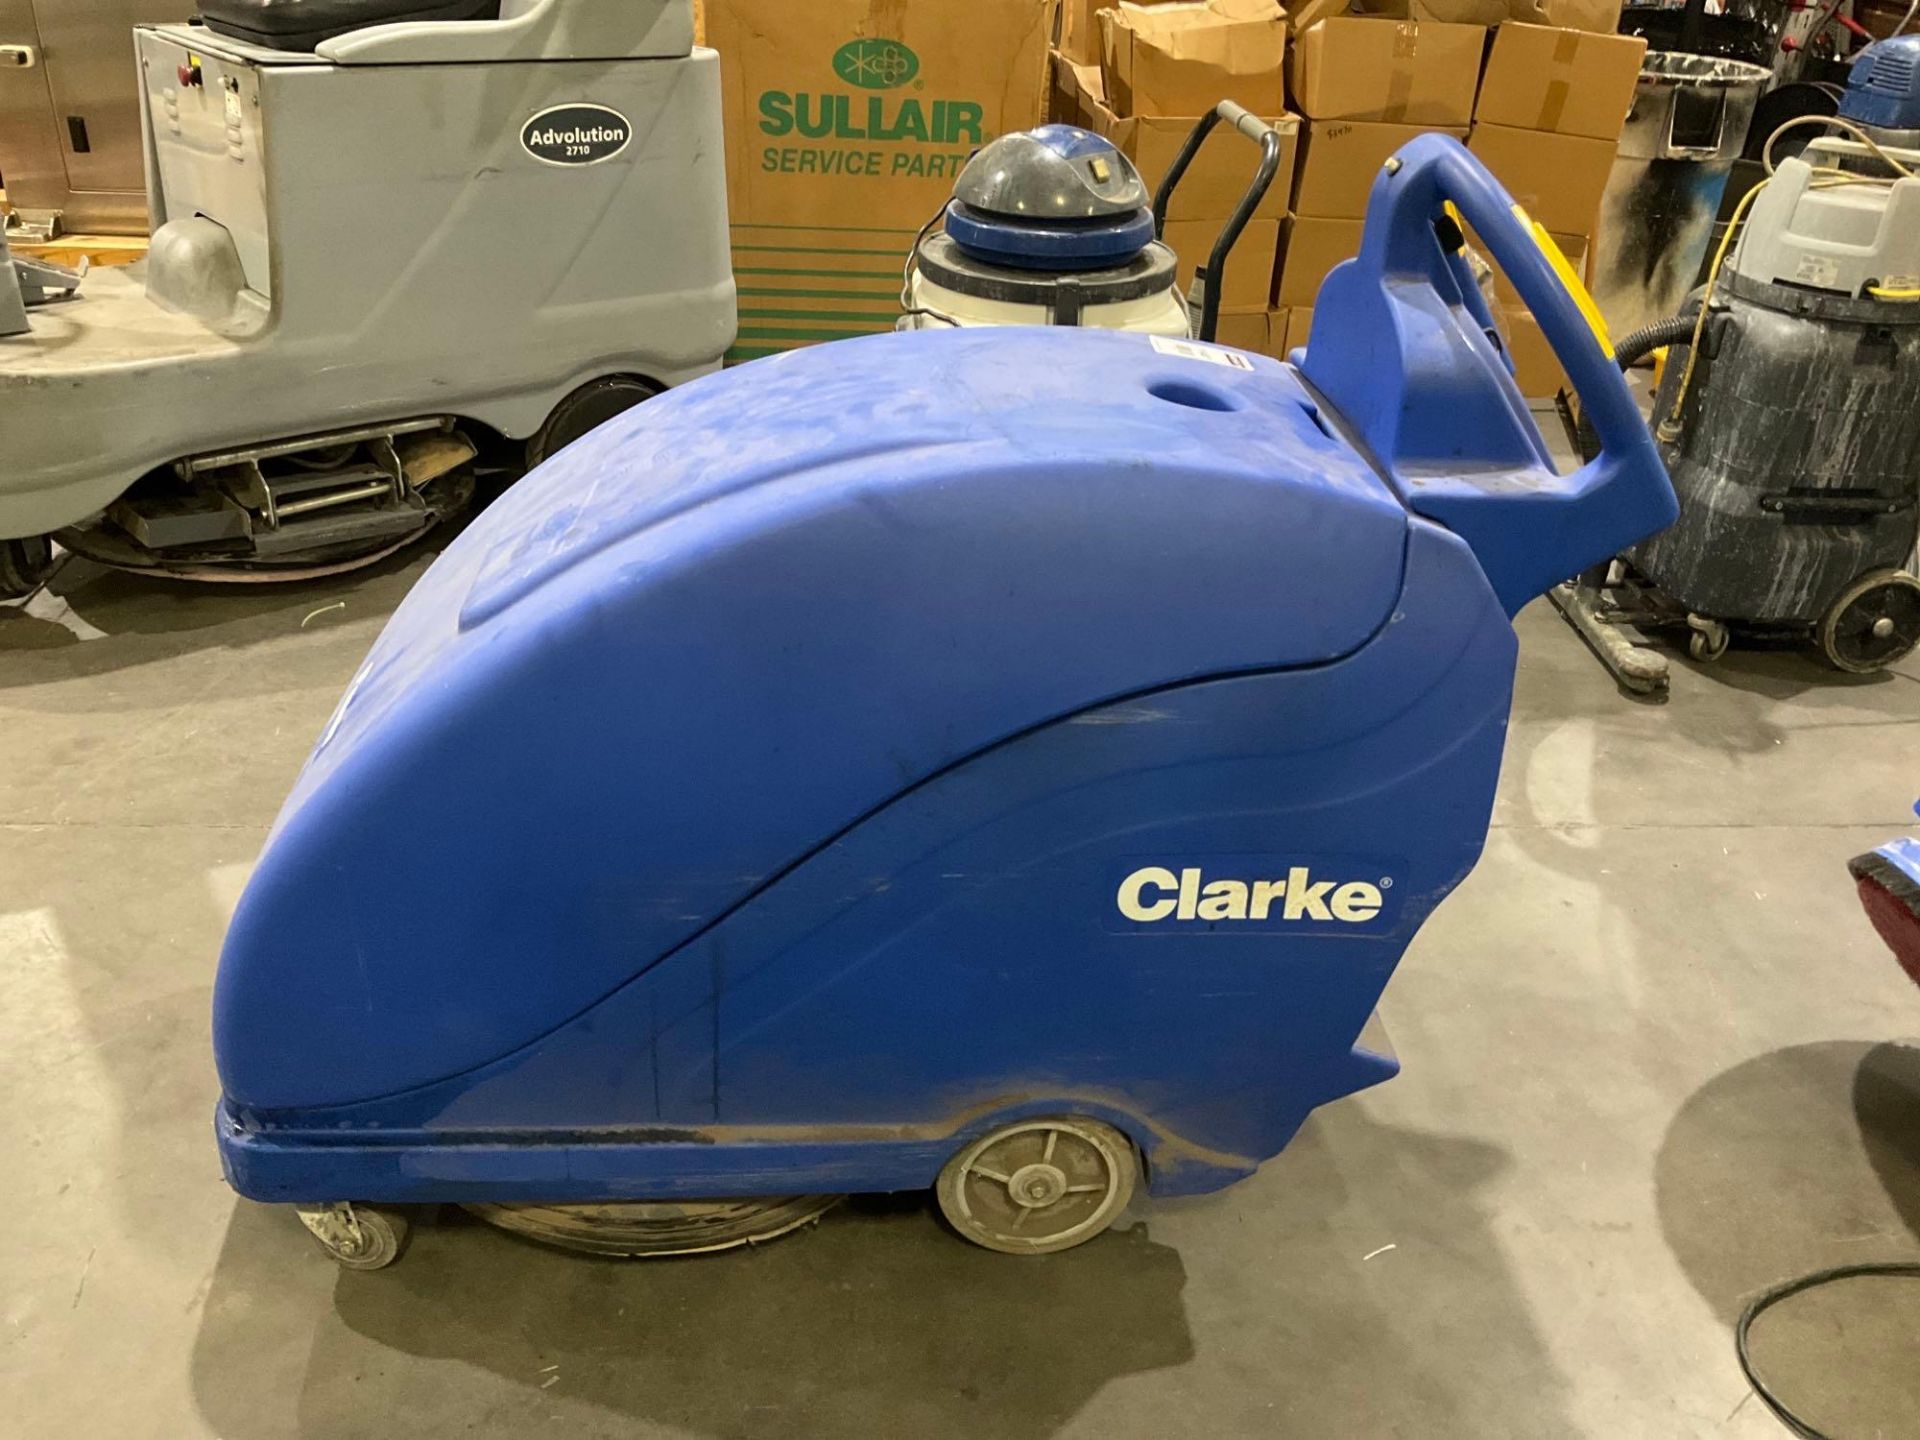 CLARKE WALK BEHIND FLOOR BURNISHER MODEL FUSION 20T 195 AH, ELECTRIC, APPROX 36 VOLTS, NEW BATTERIES - Image 2 of 12